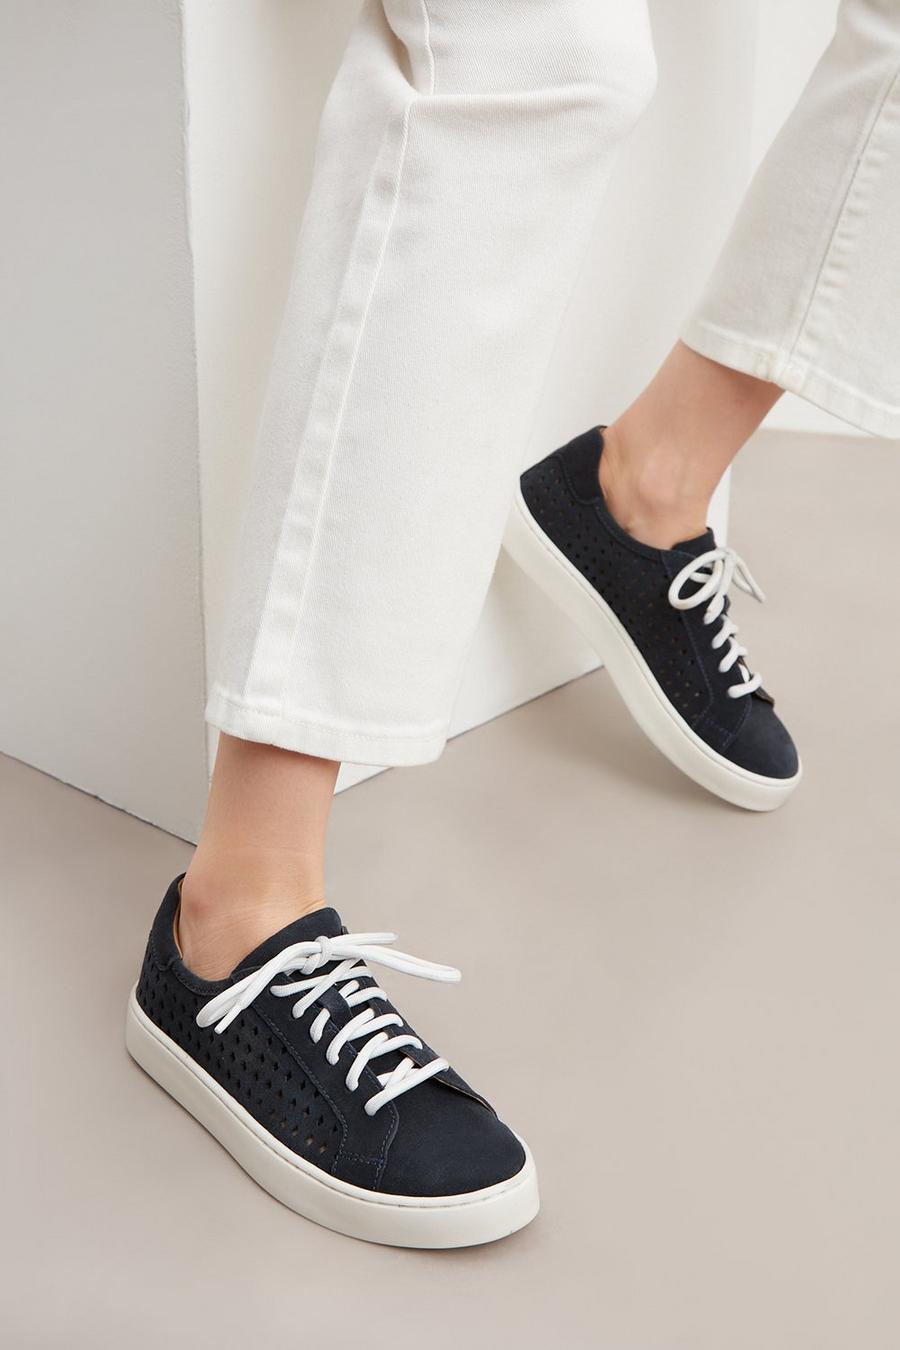 Principles: Charlotte Leather Perforated Trainers